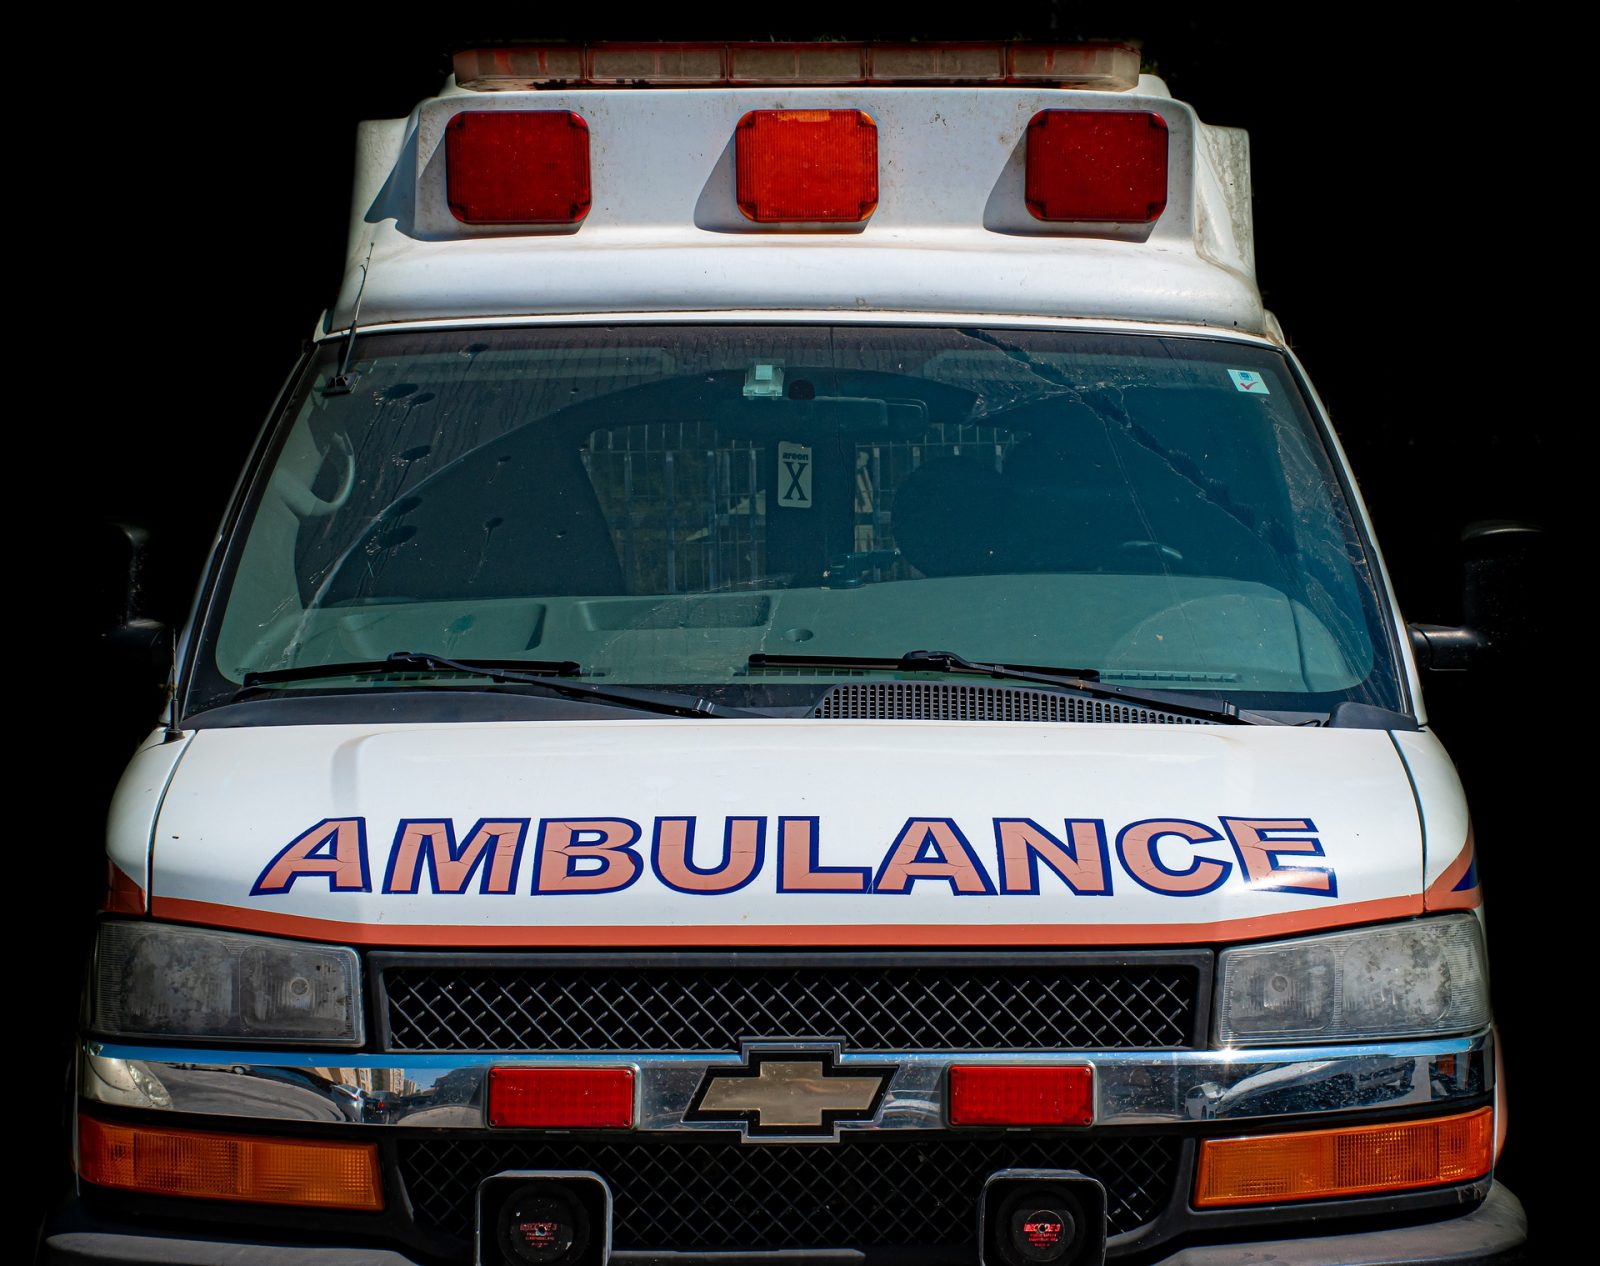 What is a private ambulance?